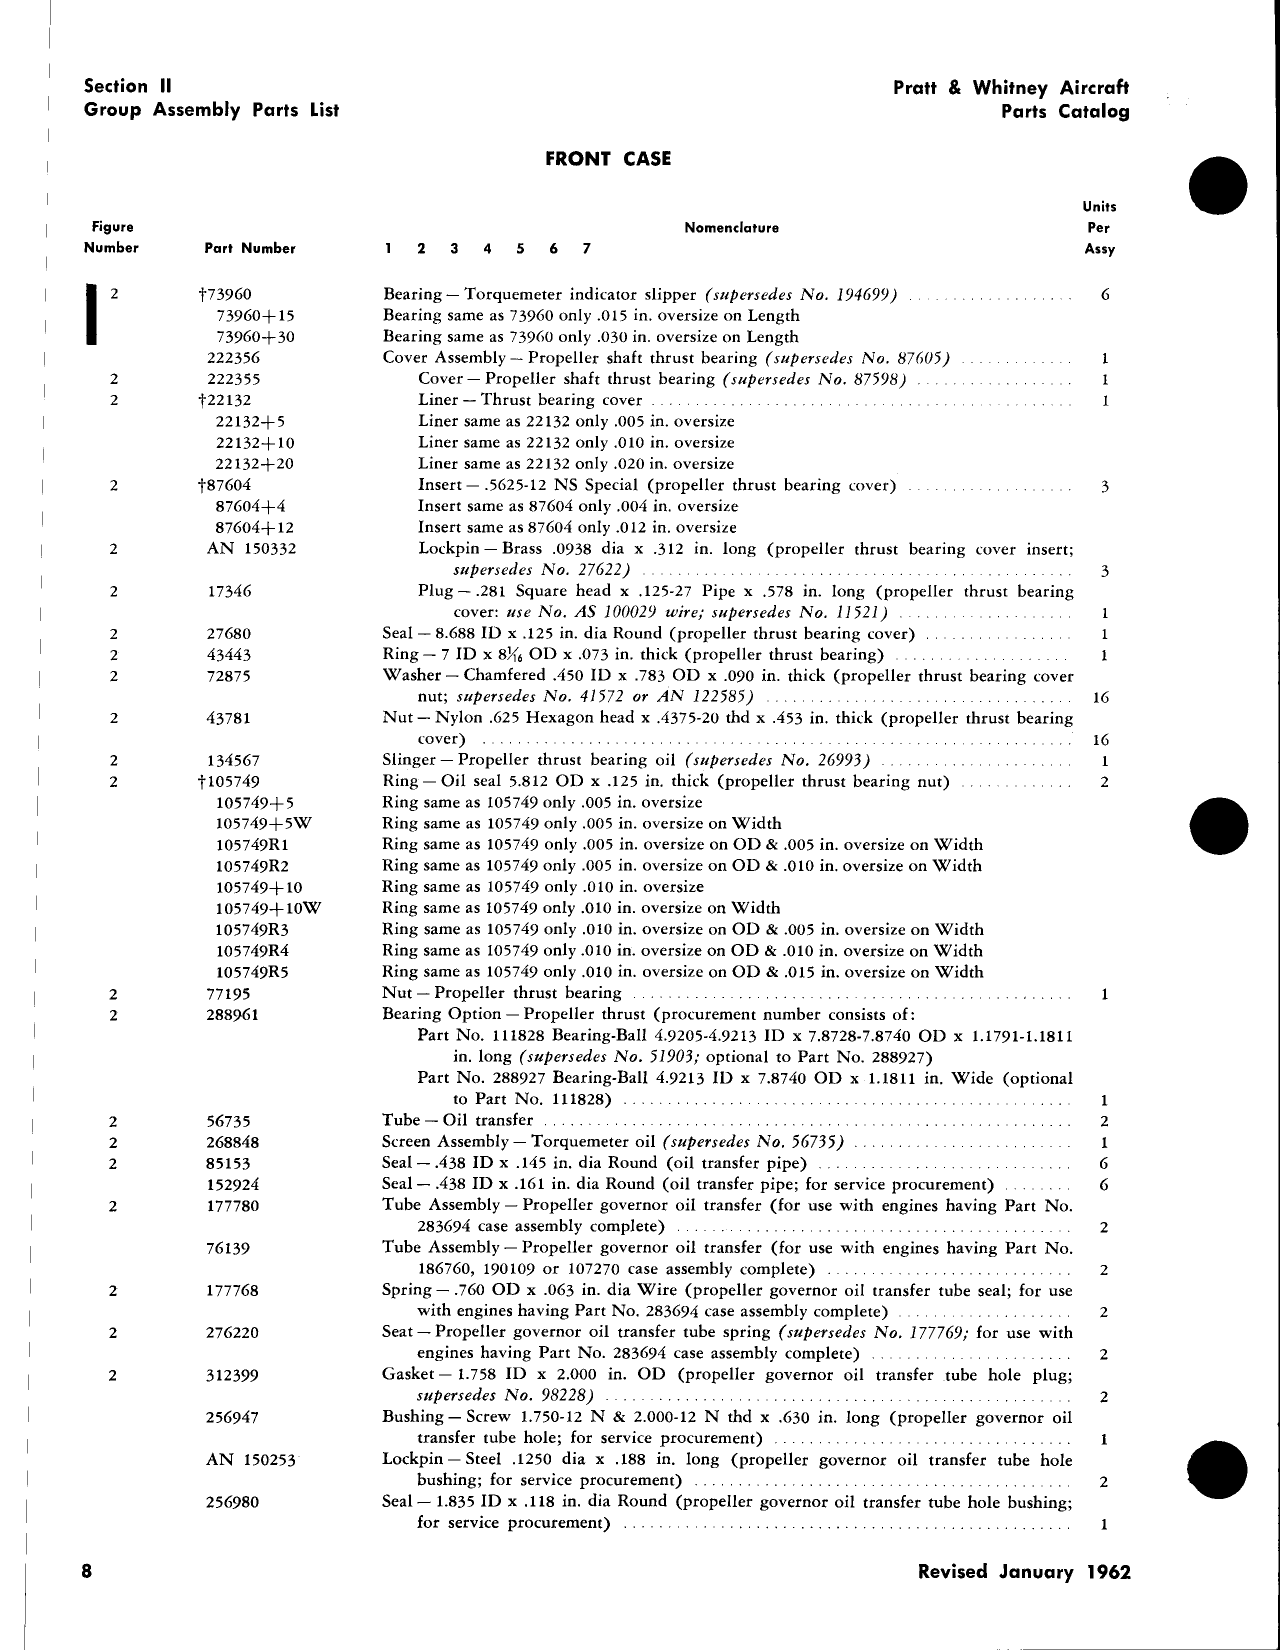 Sample page 11 from AirCorps Library document: R-2800 Double Wasp Parts Catalog